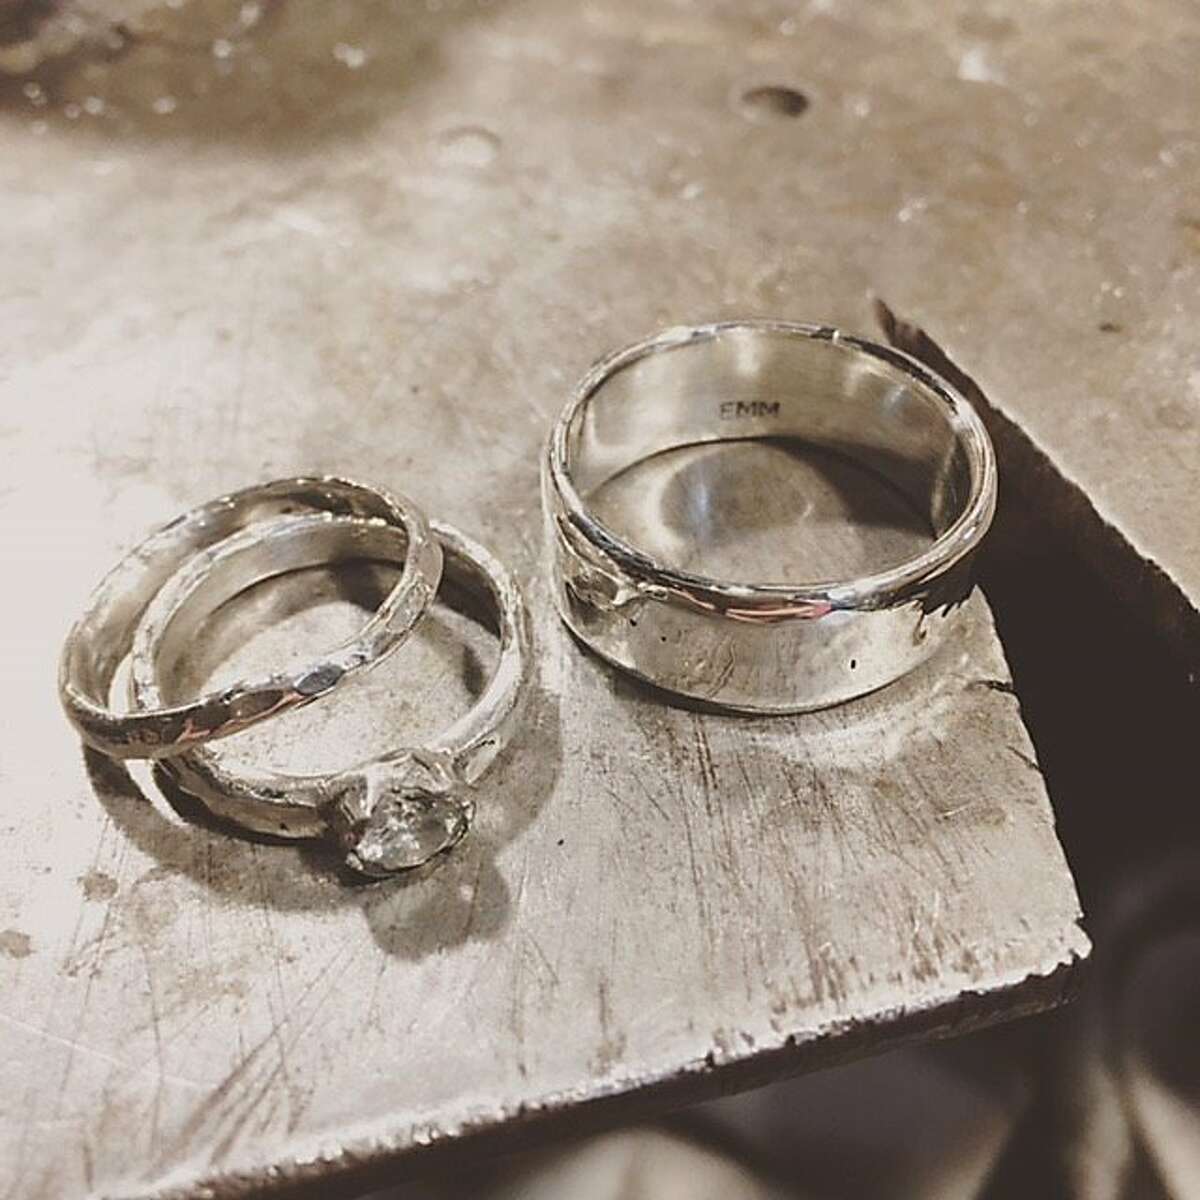 Betrothed couples are discovering an alternative path � fabricating their own, one-of-a-kind rings in the heart of North Beach at Macchiarini Creative Designs.